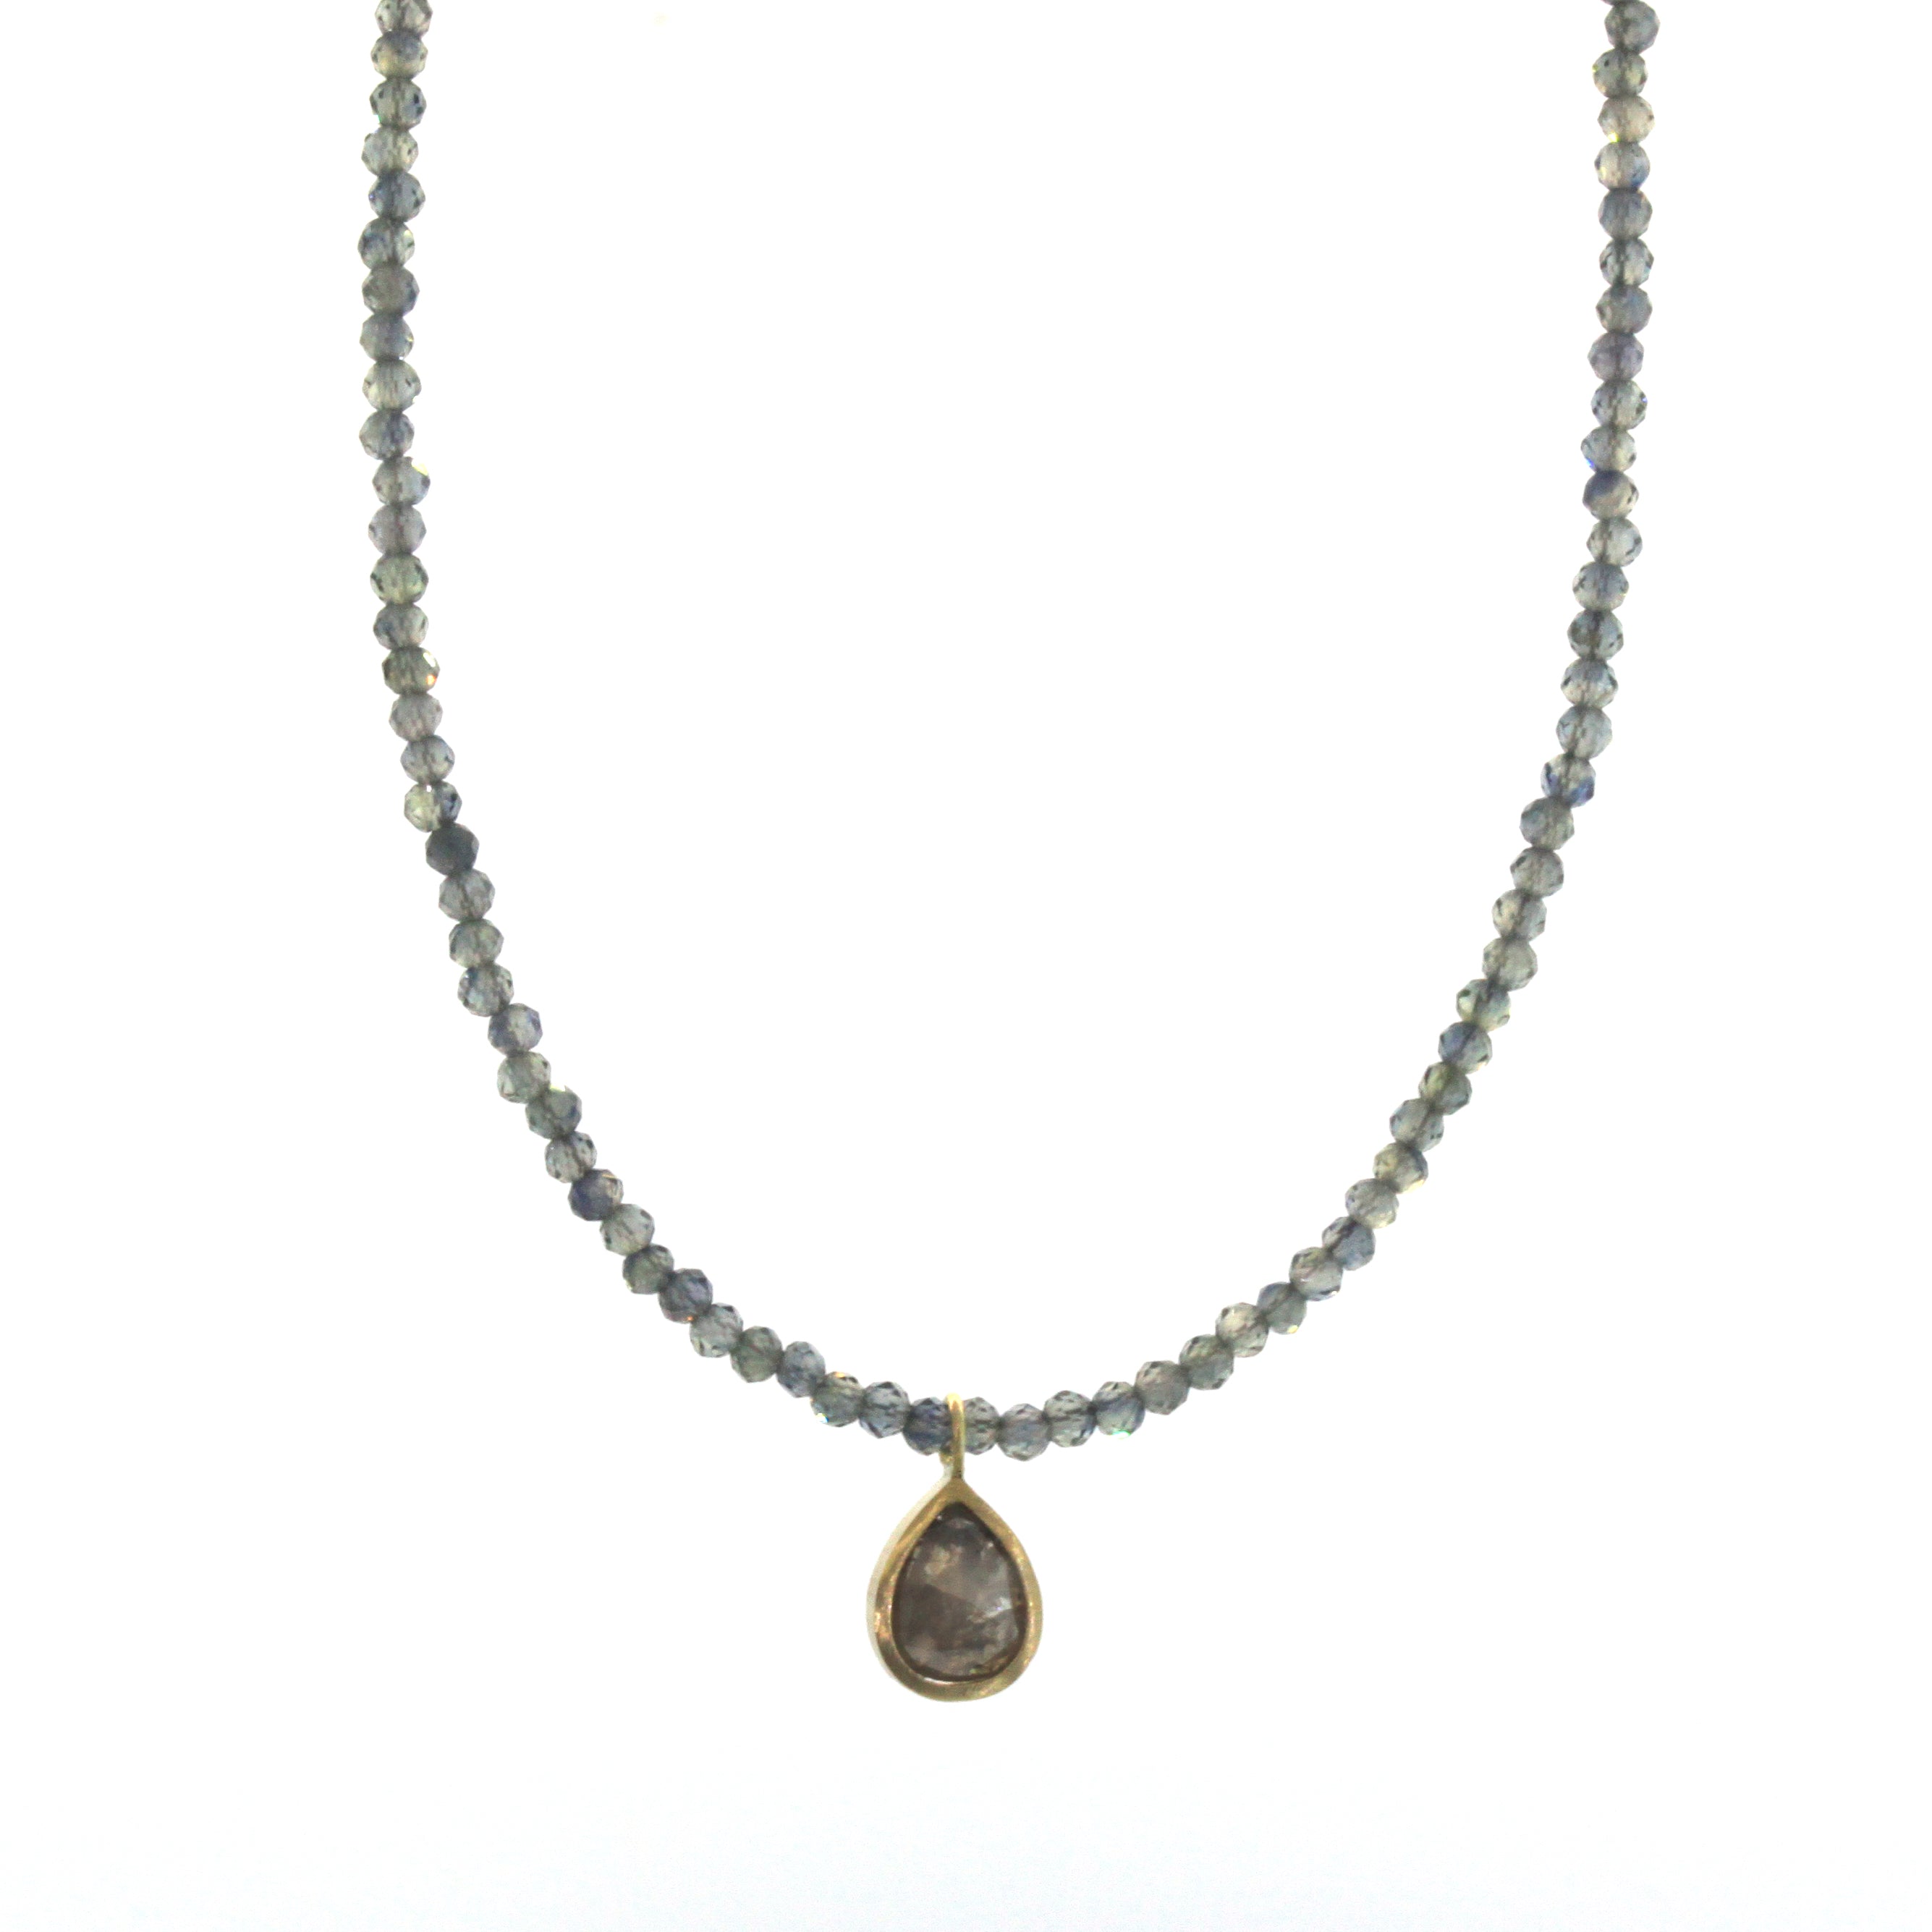 This Blue Sapphire & Raw Diamond Necklace was hand made at Rebecca Lankford Designs in Houston, Texas. Every diamond is hand picked for each individual necklace making them all one-of-a-kind. 